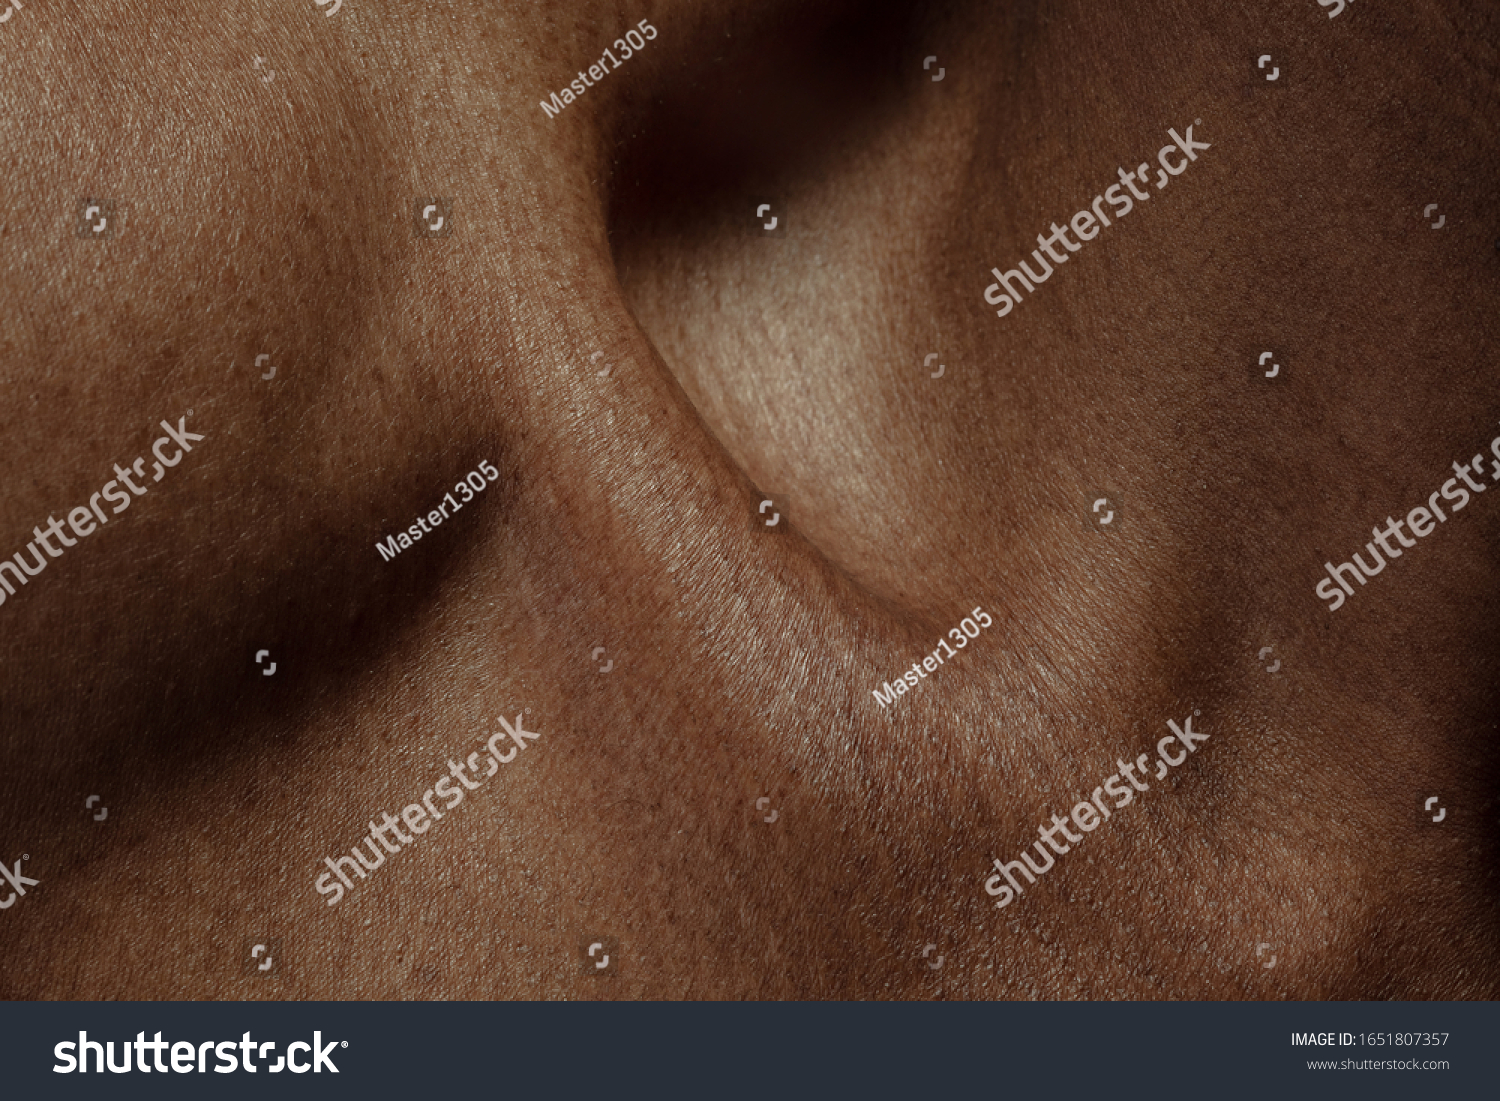 Collarbones. Detailed texture of human skin. Close up shot of young african-american male body. Skincare, bodycare, healthcare, hygiene and medicine concept. Looks beauty and well-kept. Dermatology. #1651807357